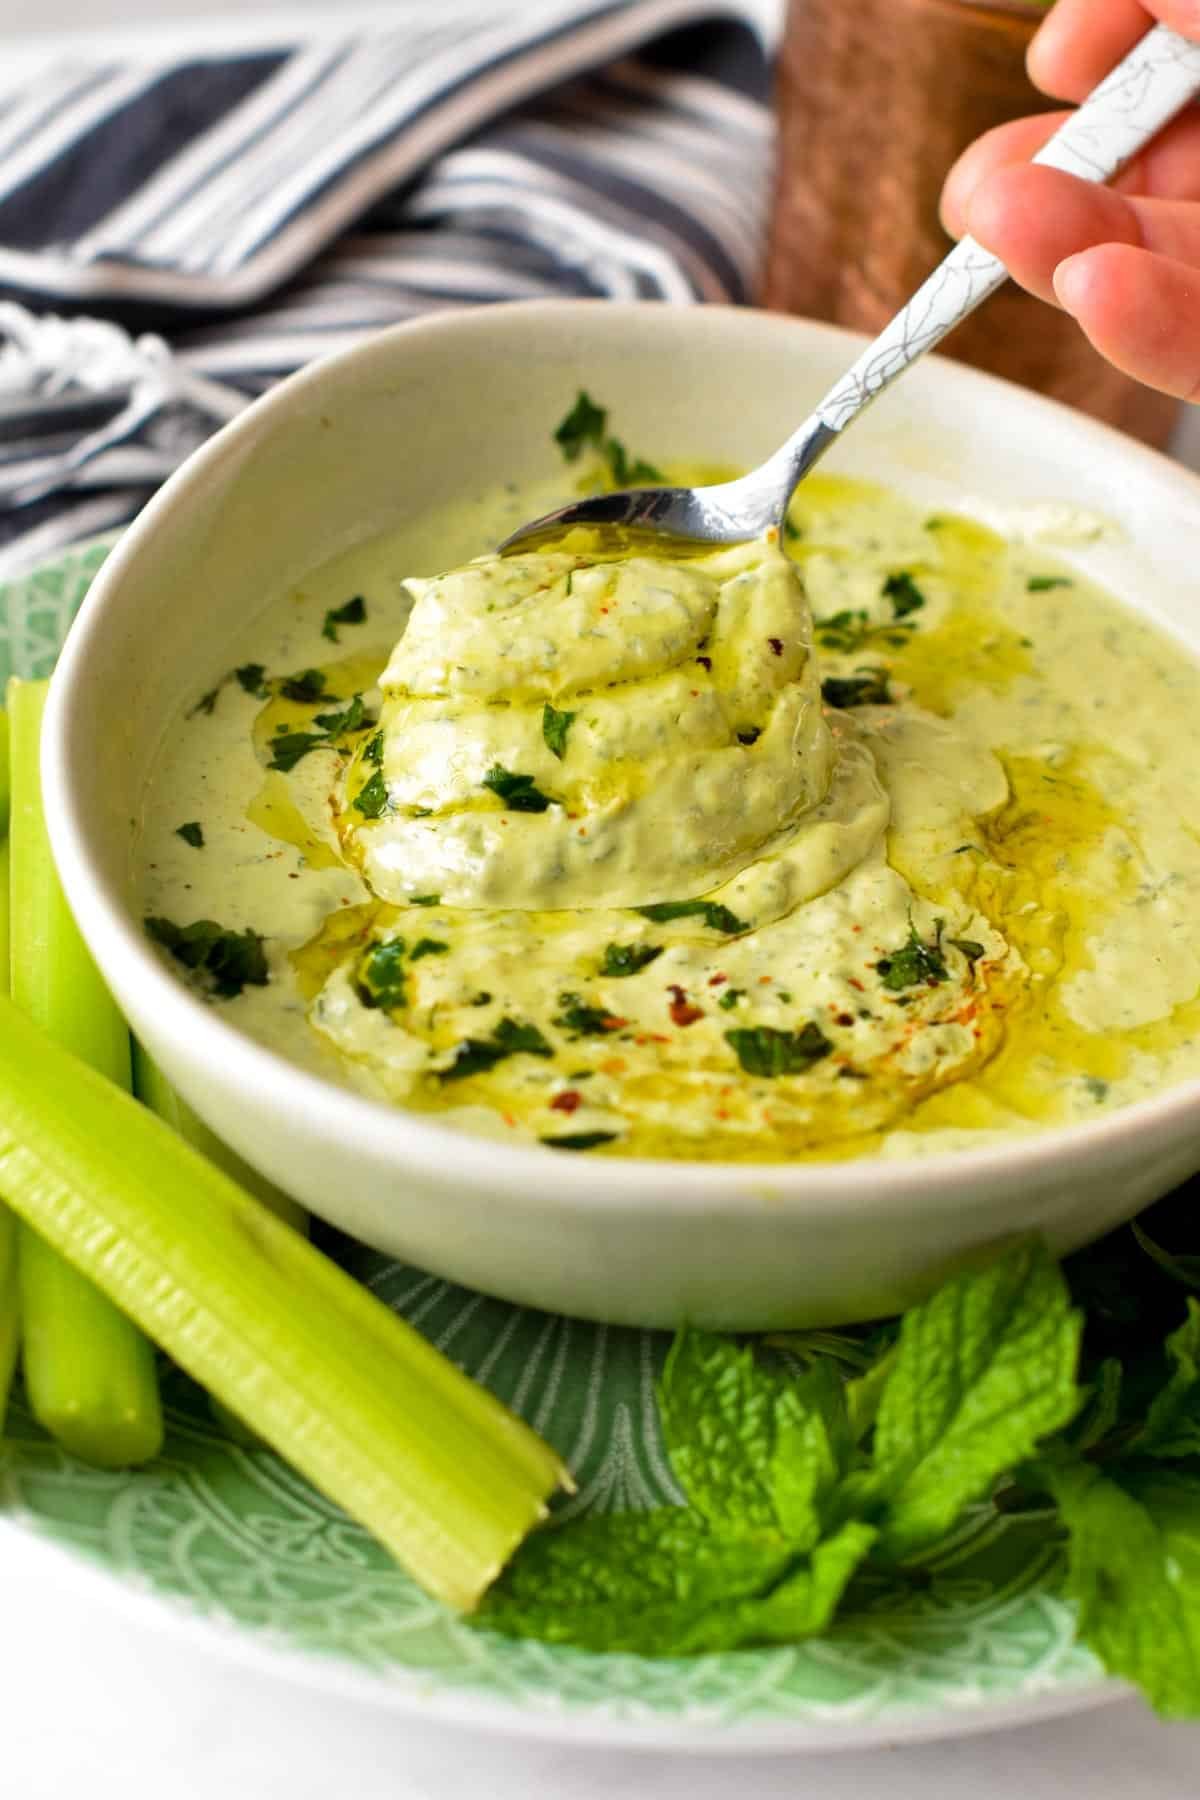 This Green Goddess Dip is a creamy refreshing yogurt feta dip packed with 5 herbs and delicious Mediterranean flavors. Plus, this easy dip recipe is also packed with protein, vegetarian and gluten-free.